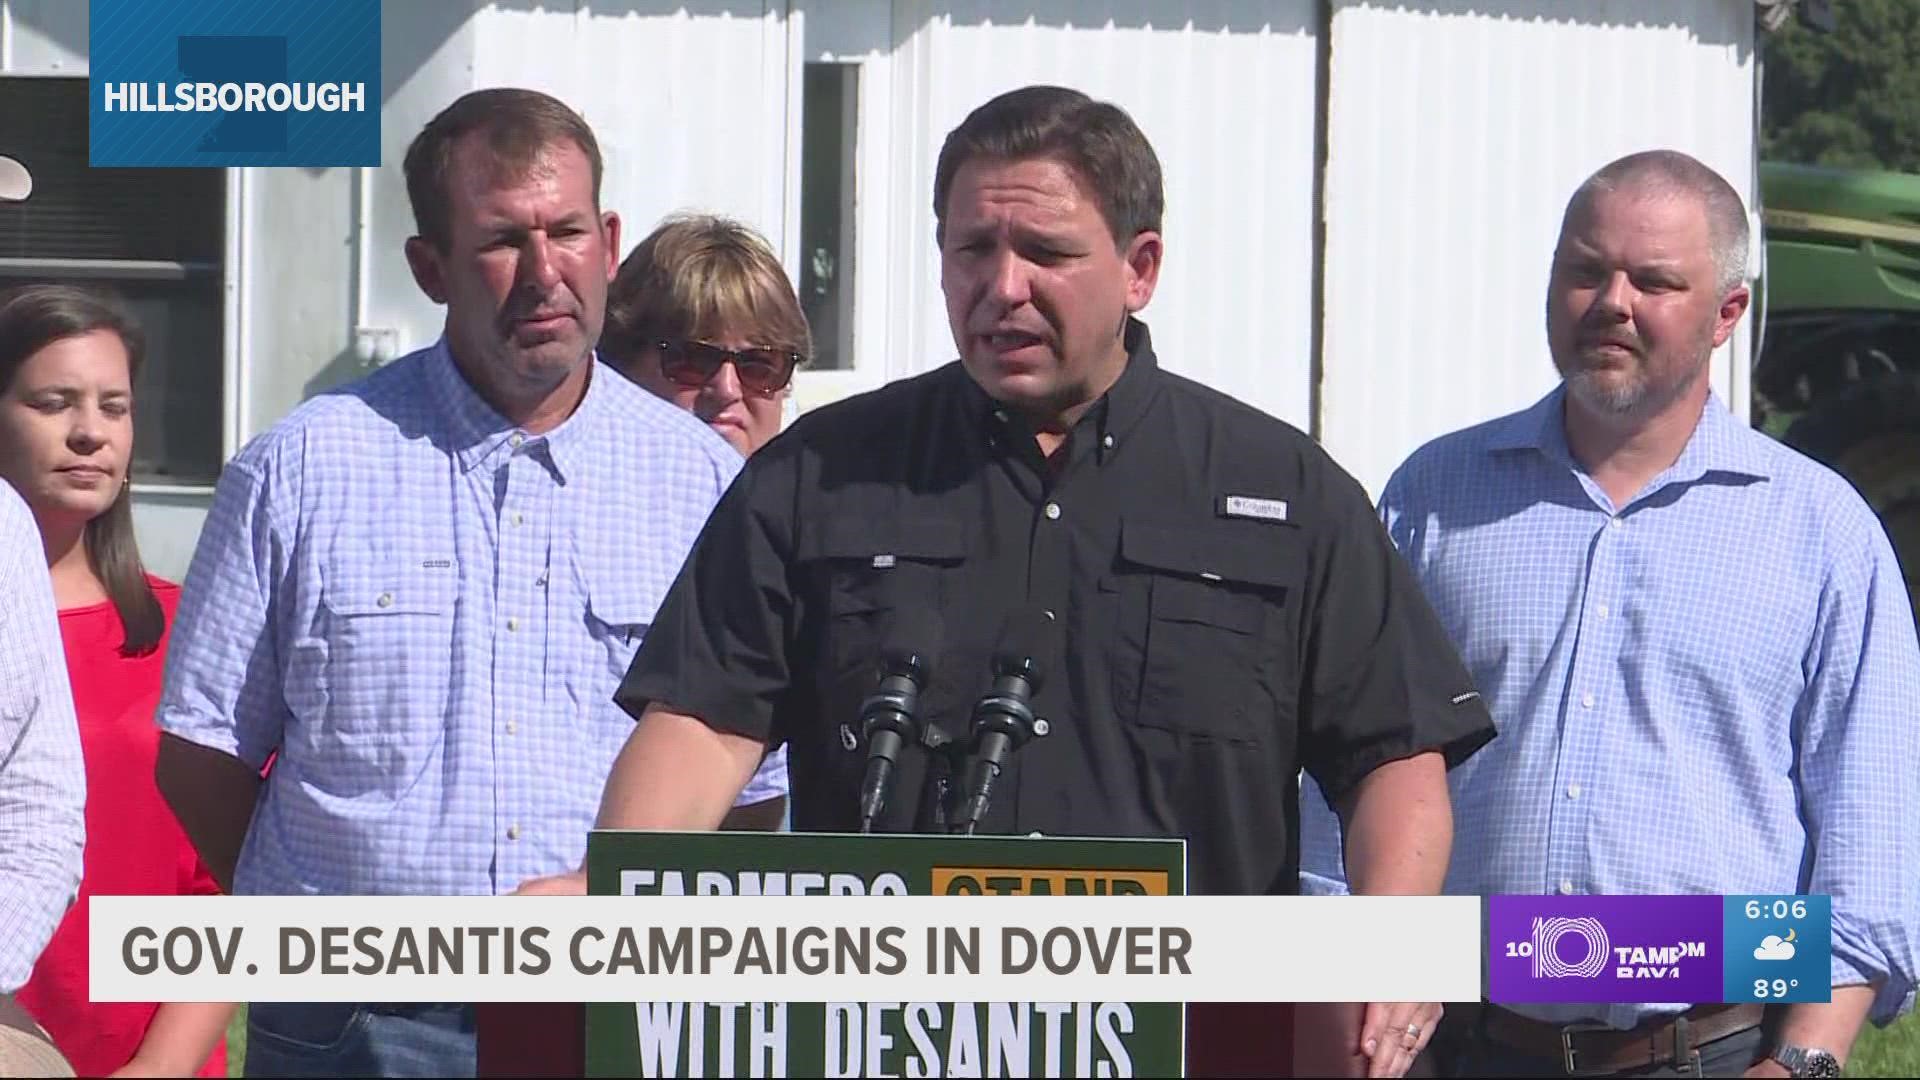 DeSantis made a stop in Hillsborough County's strawberry growers' stomping grounds.